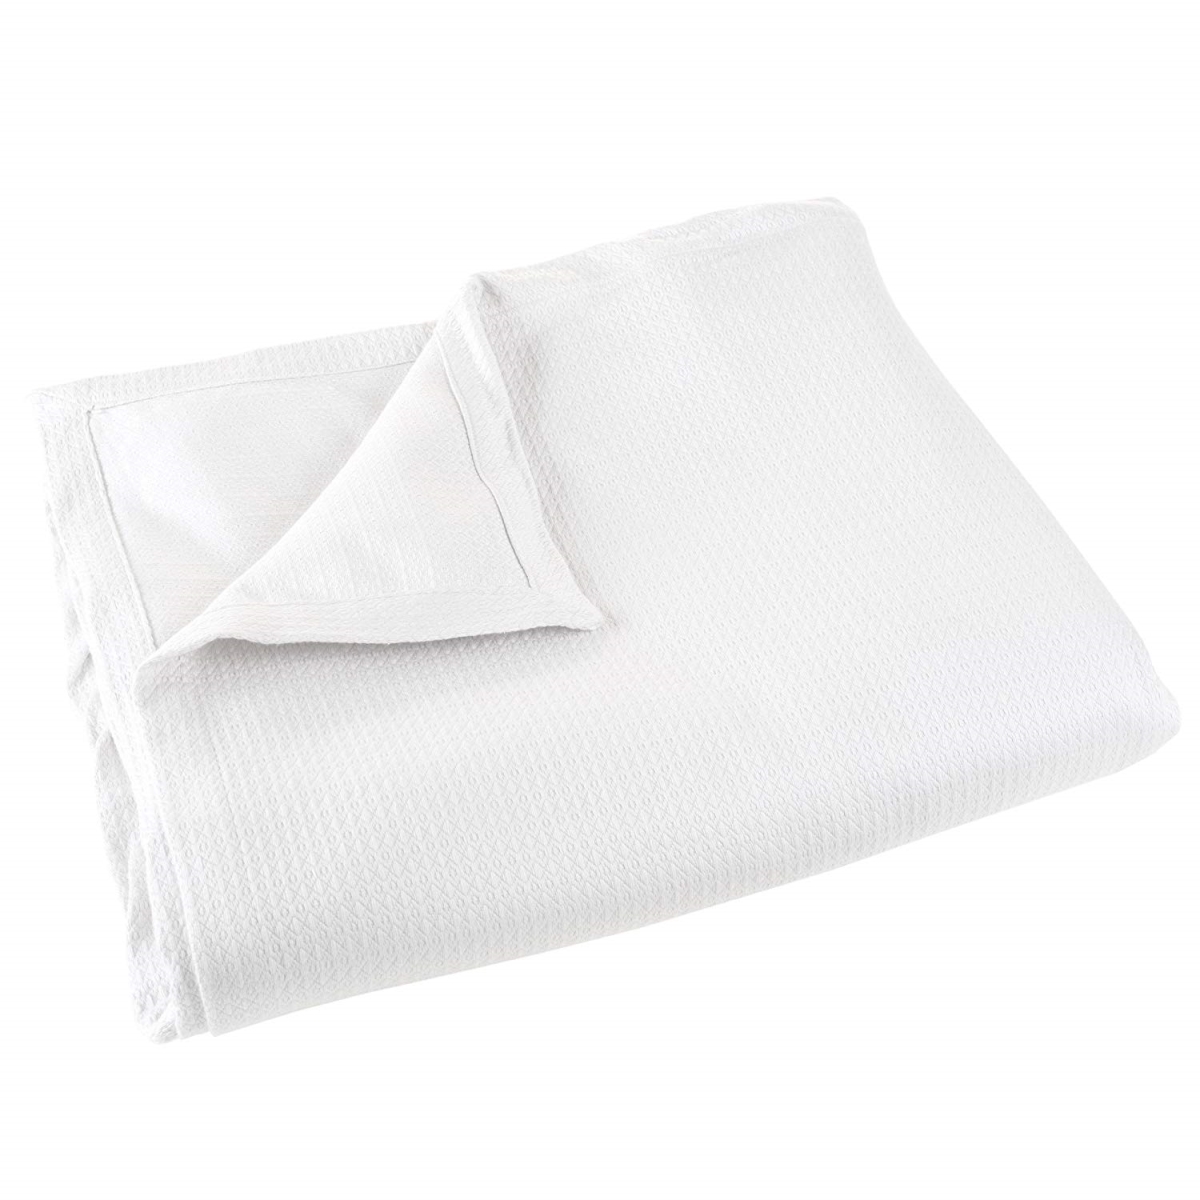 61a-43302 Soft Breathable 100 Percent Cotton Blanket, White - Full & Queen Size